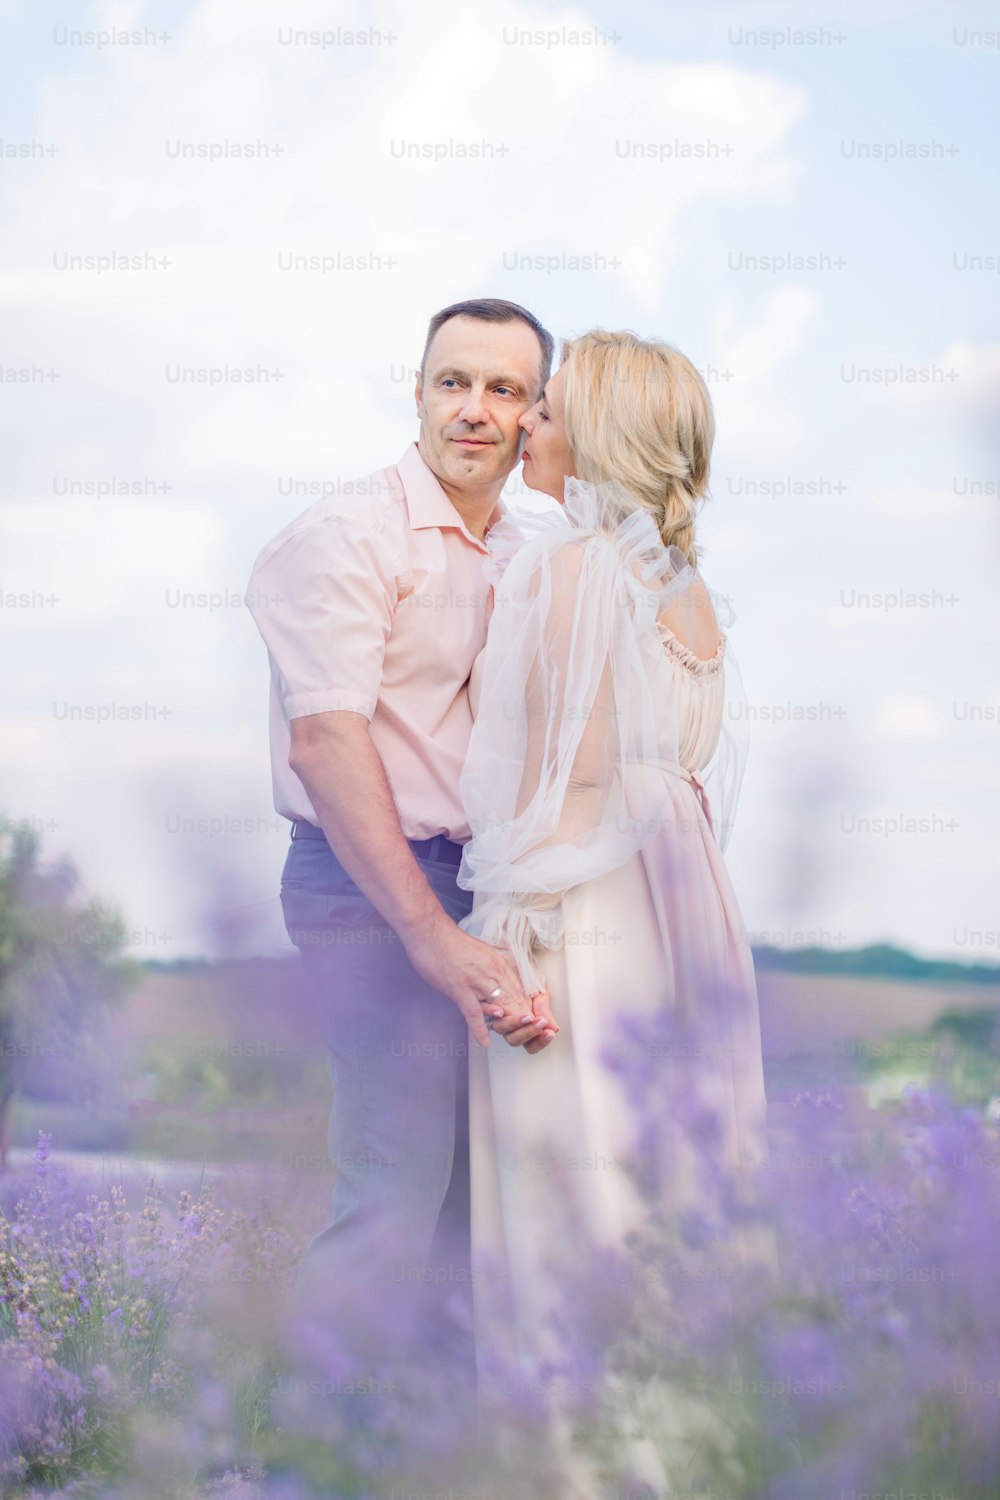 View through the lavender flowers. Happy middle aged couple, man and woman in elegant outfits, embracing and enjoying romantic moments together in the lavender field